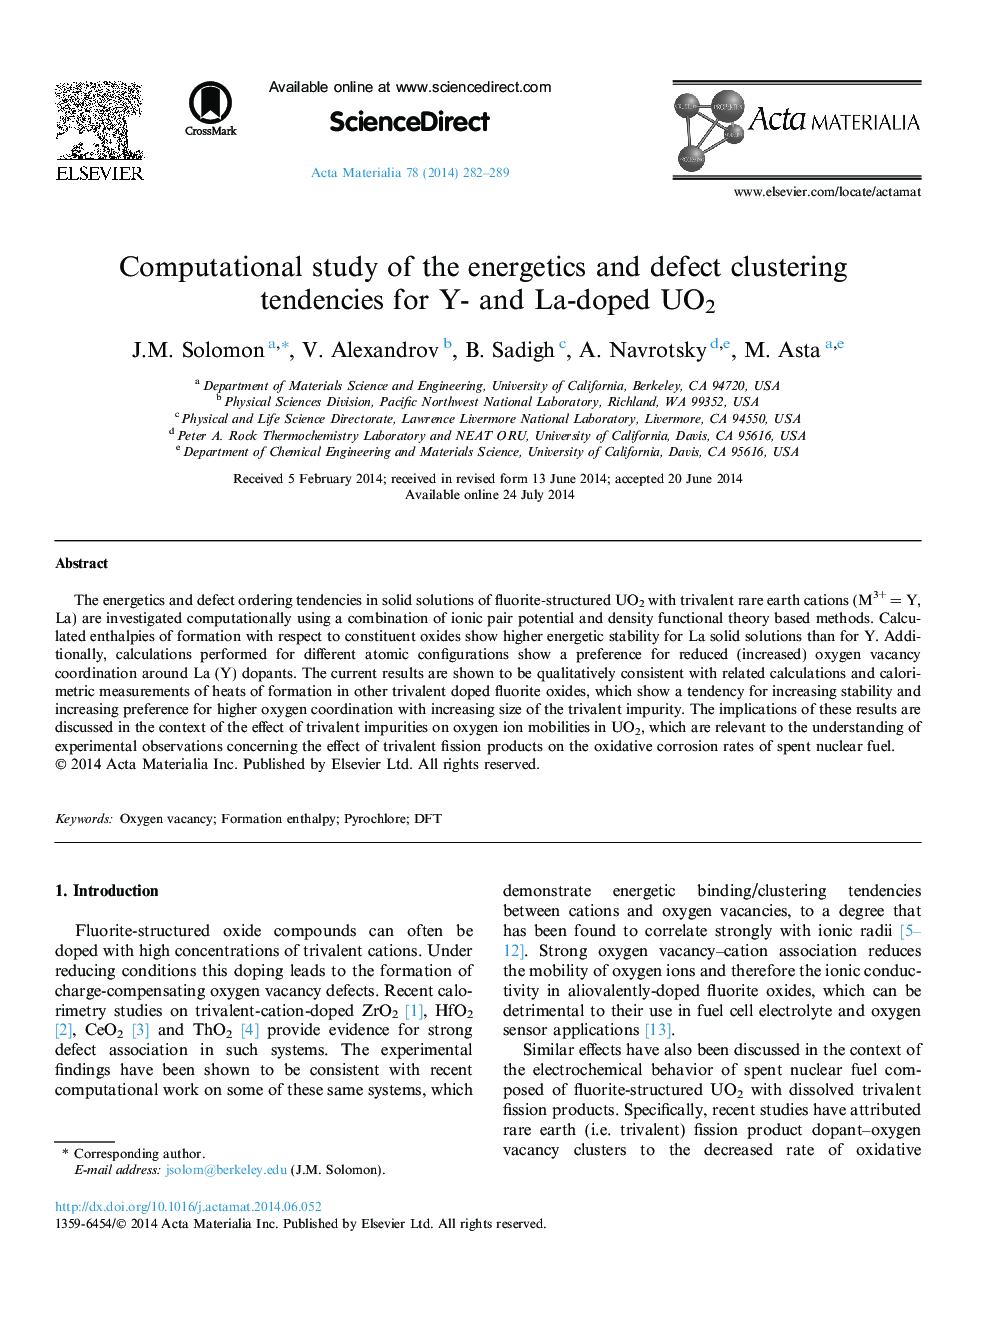 Computational study of the energetics and defect clustering tendencies for Y- and La-doped UO2